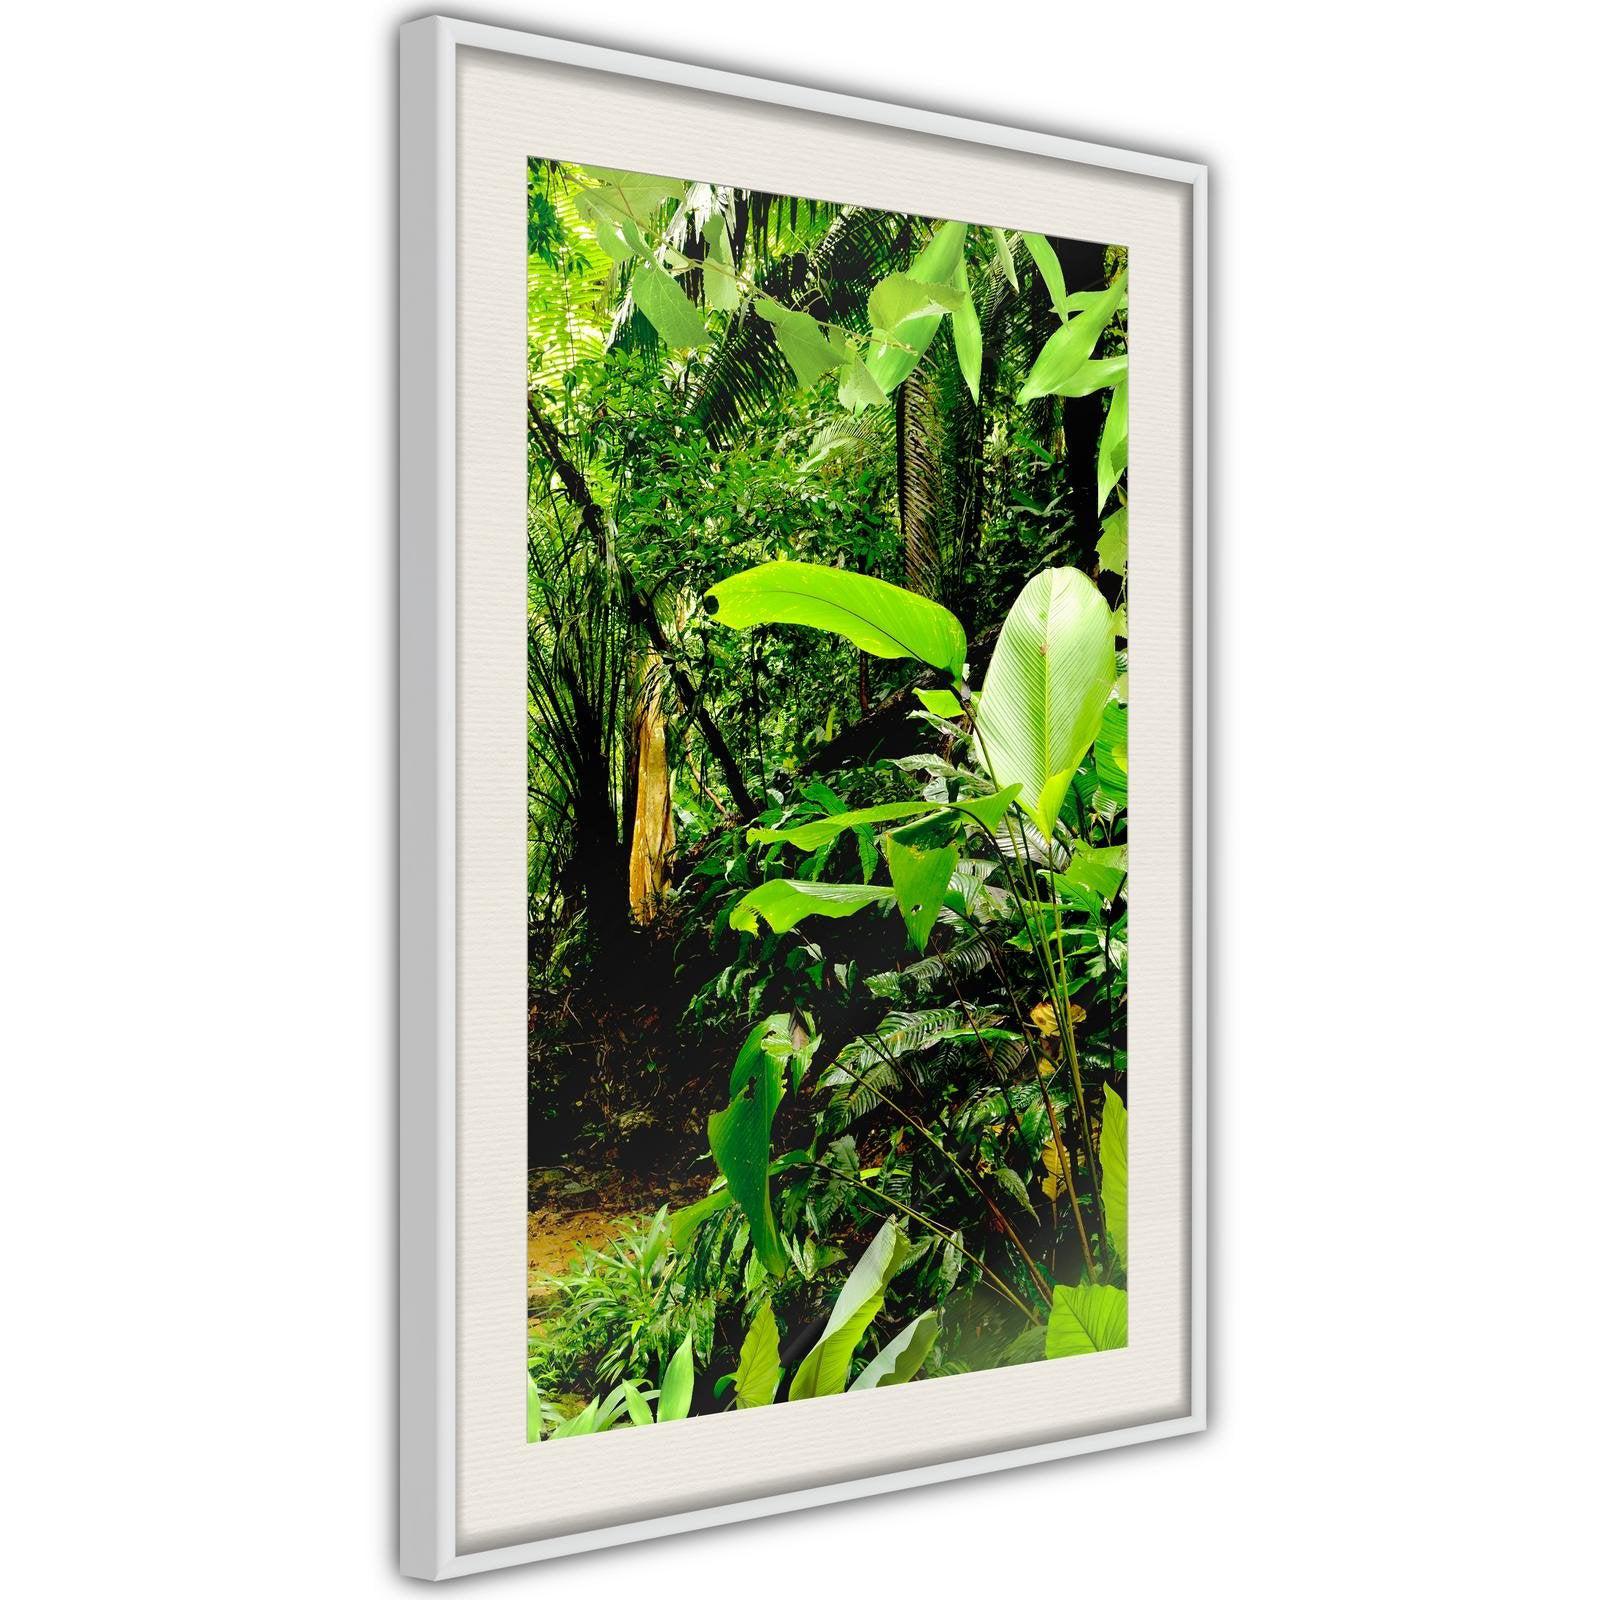 Inramad Poster / Tavla - In the Rainforest-Poster Inramad-Artgeist-peaceofhome.se